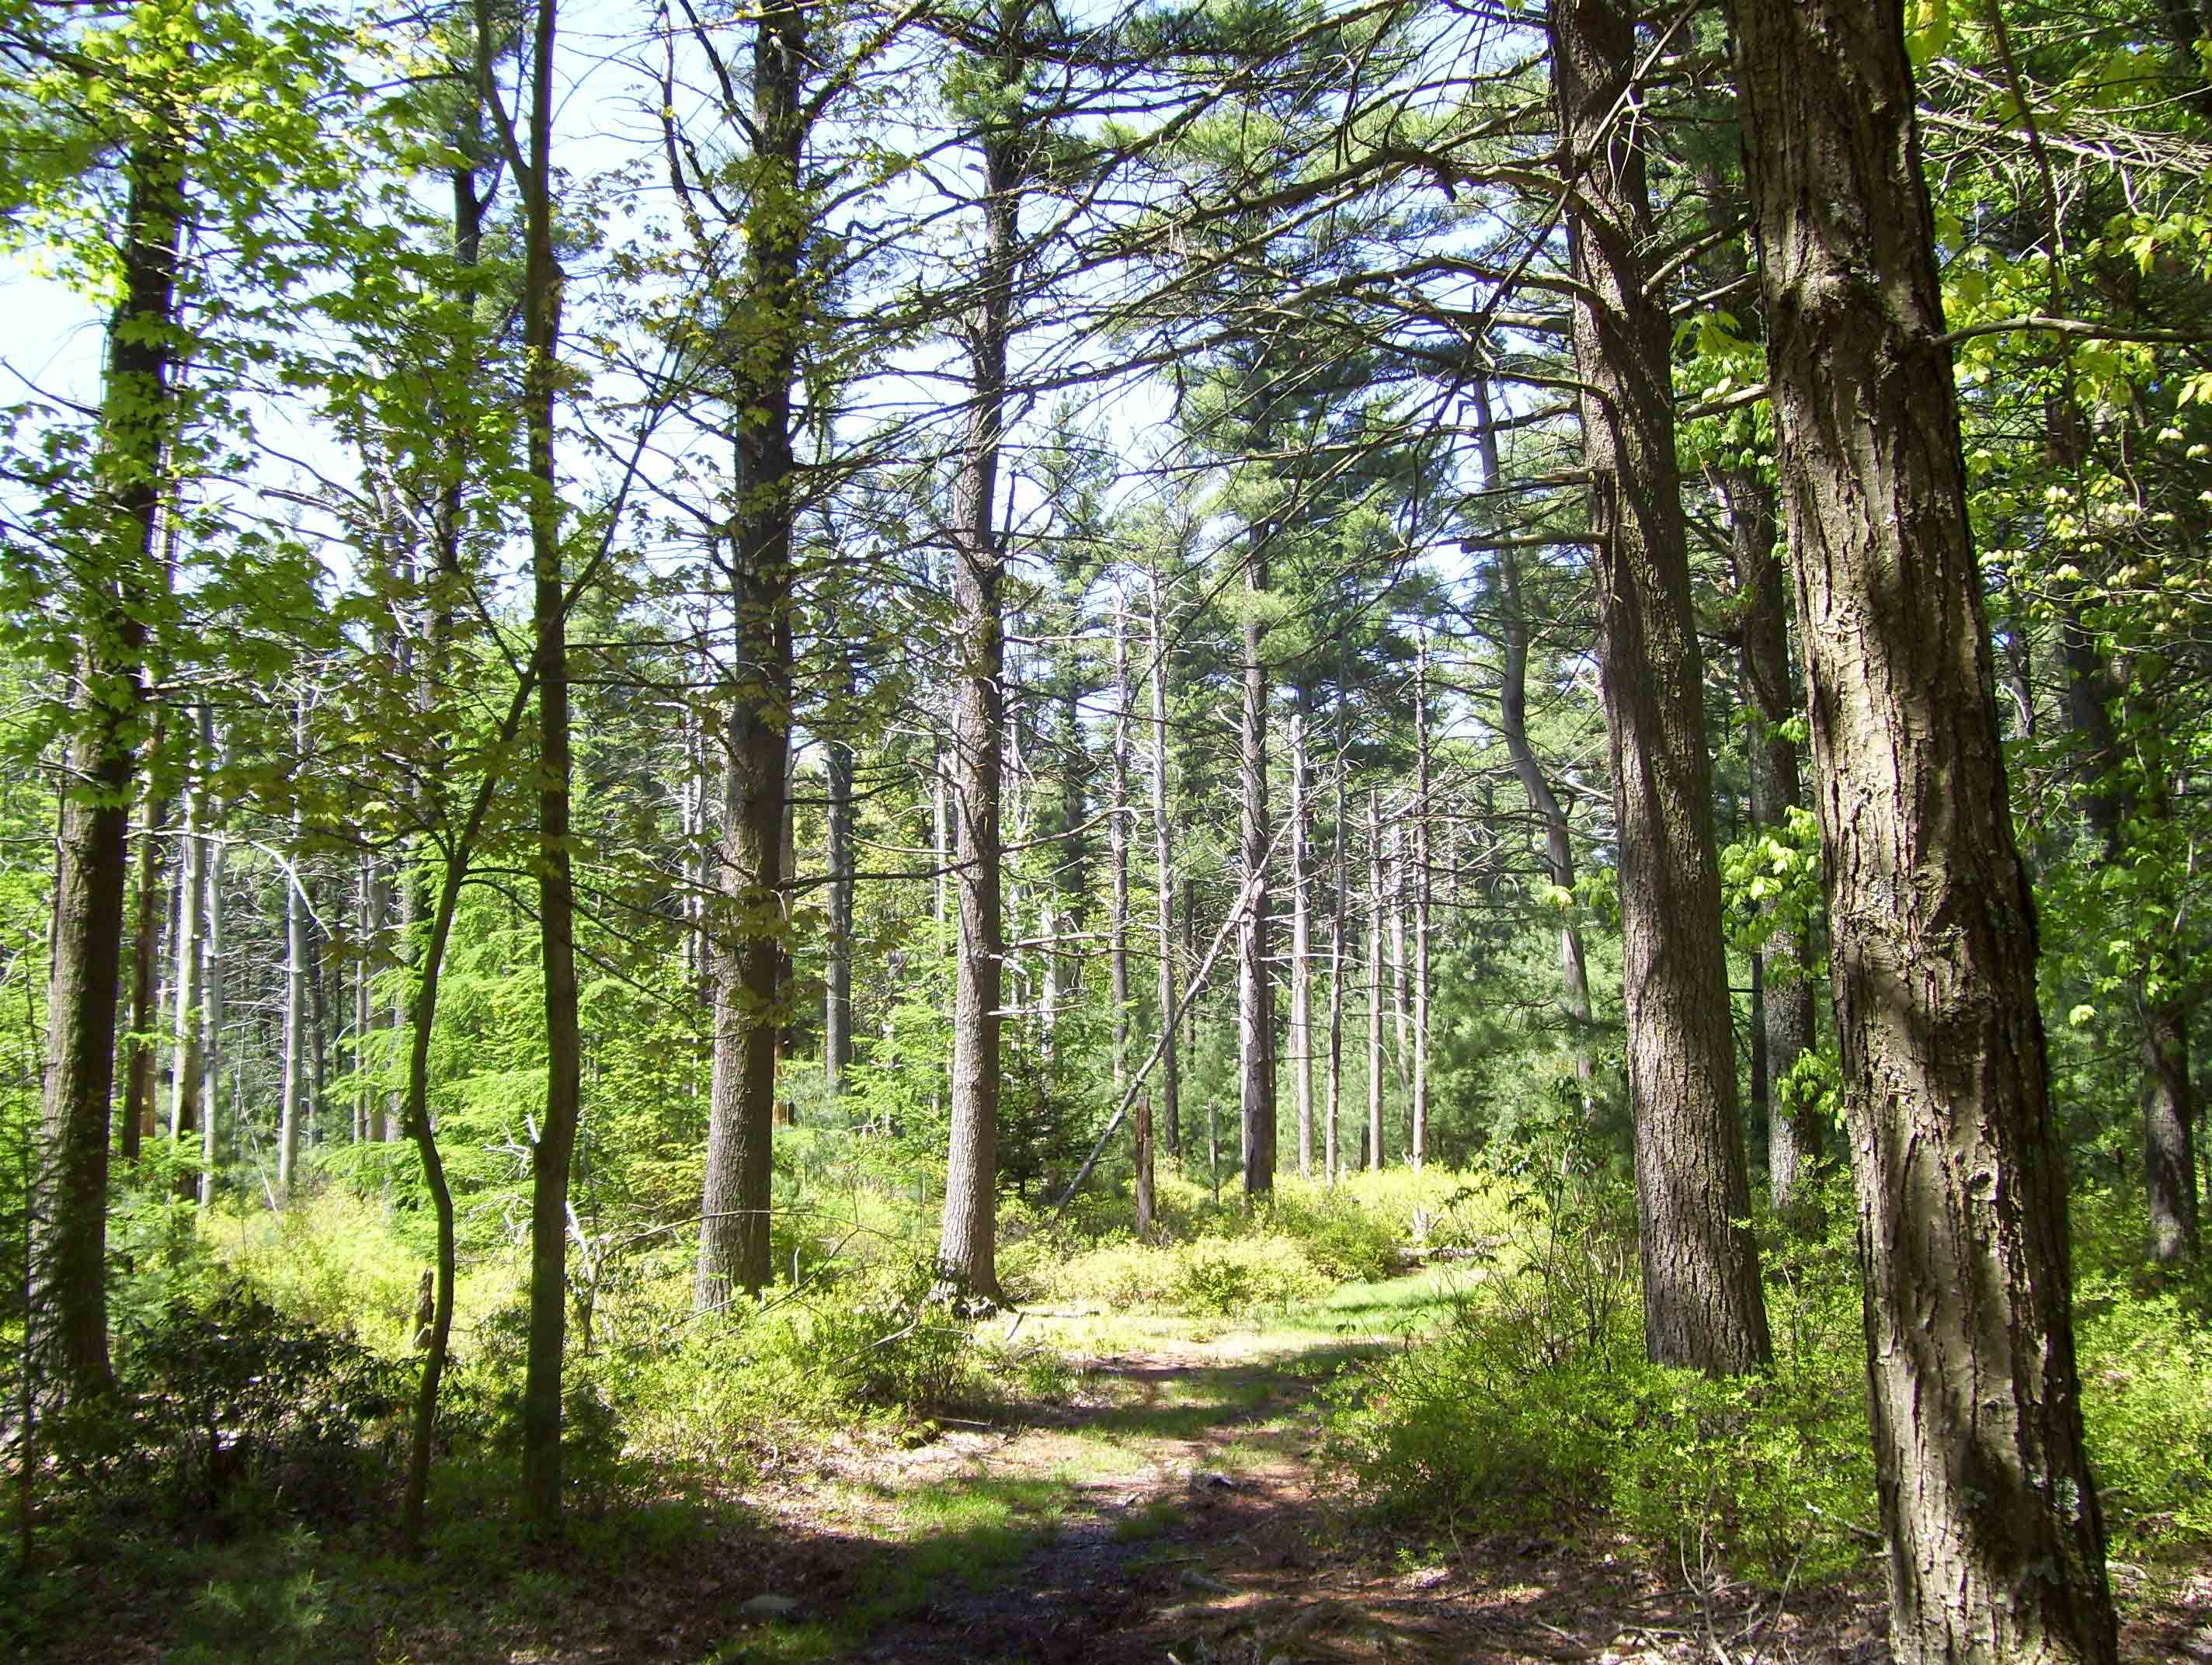 North of the first crossing of Ridge Road the trail passes along the edge of a clearing in an area of pine trees. Taken at approx. mm 11.4. Courtesy dlcul@conncoll.edu